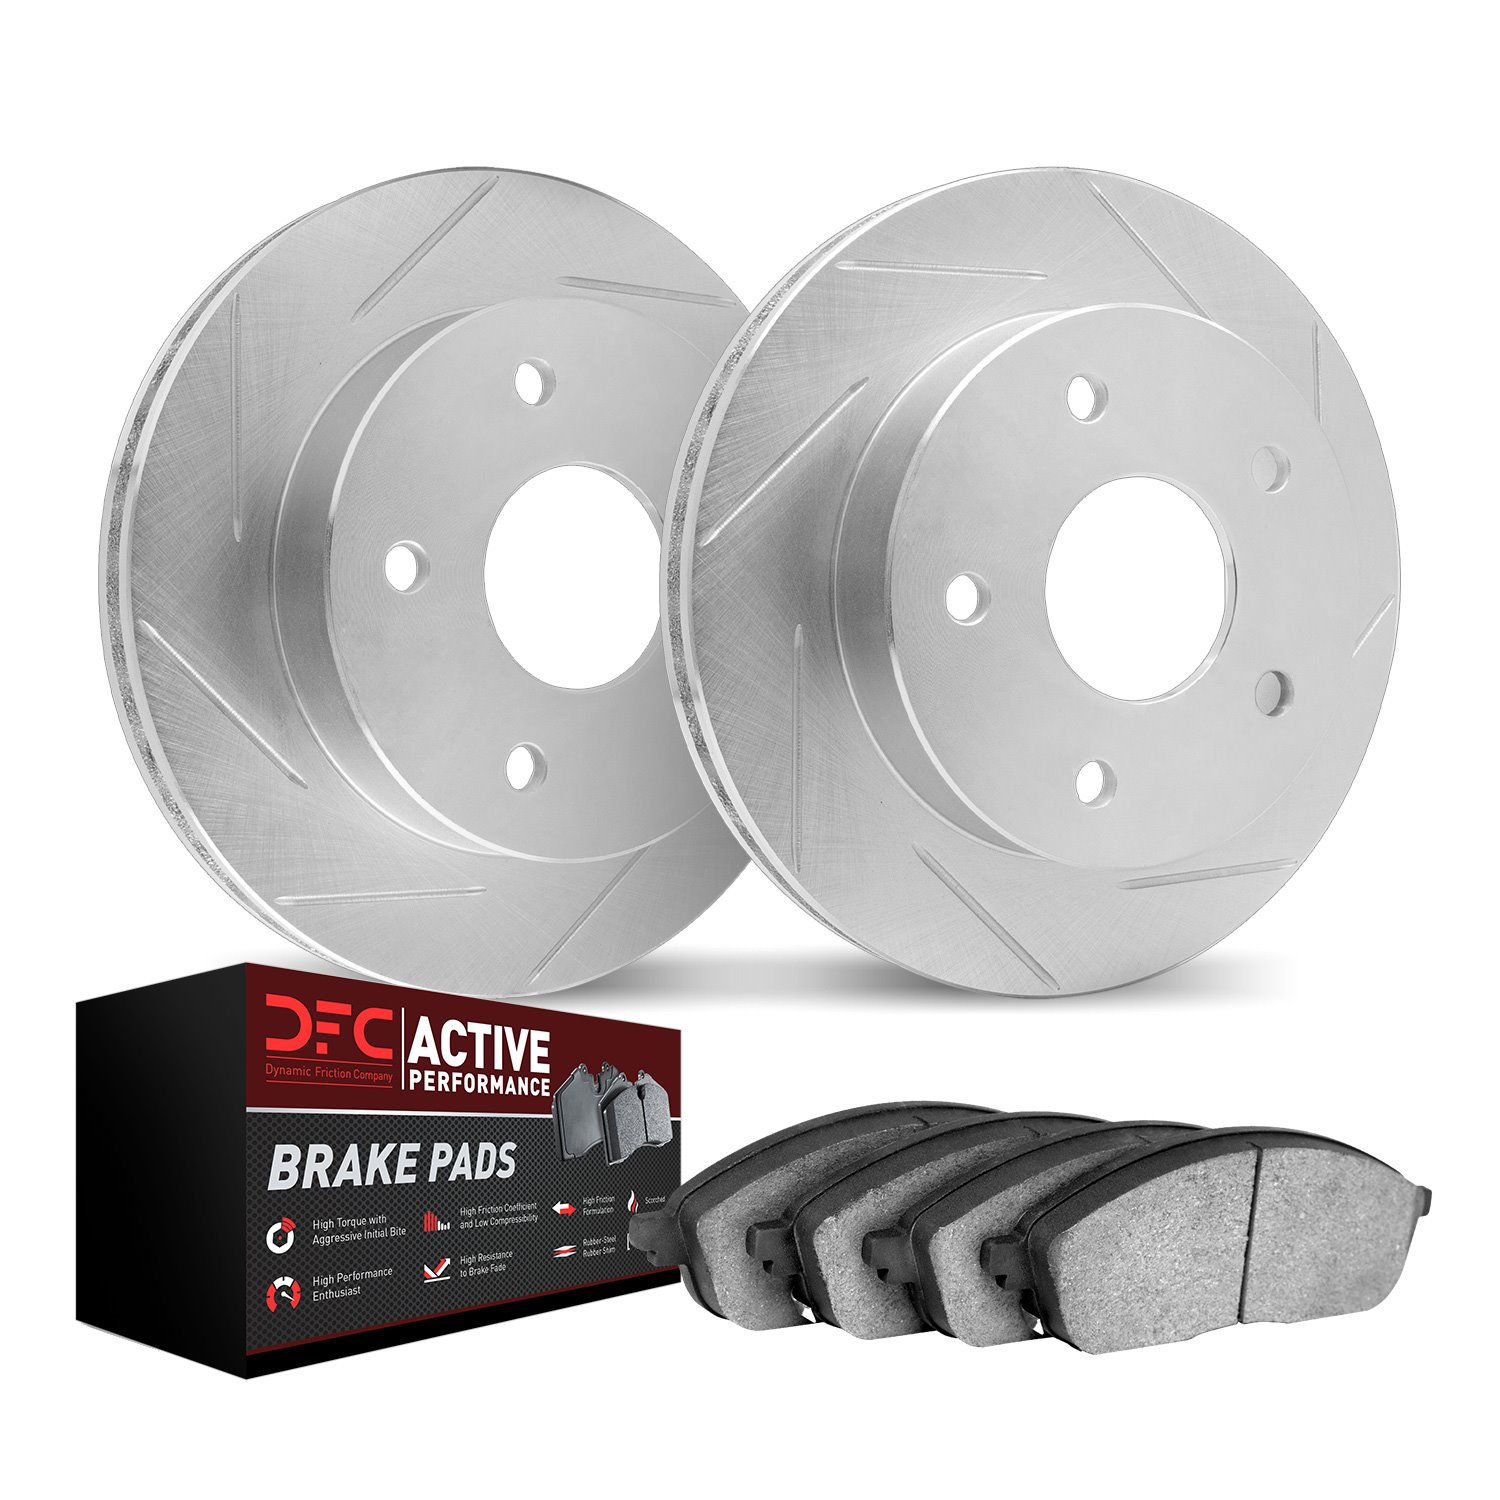 2702-32042 Geoperformance Slotted Brake Rotors with Active Performance Pads Kits, Fits Select Mini, Position: Front